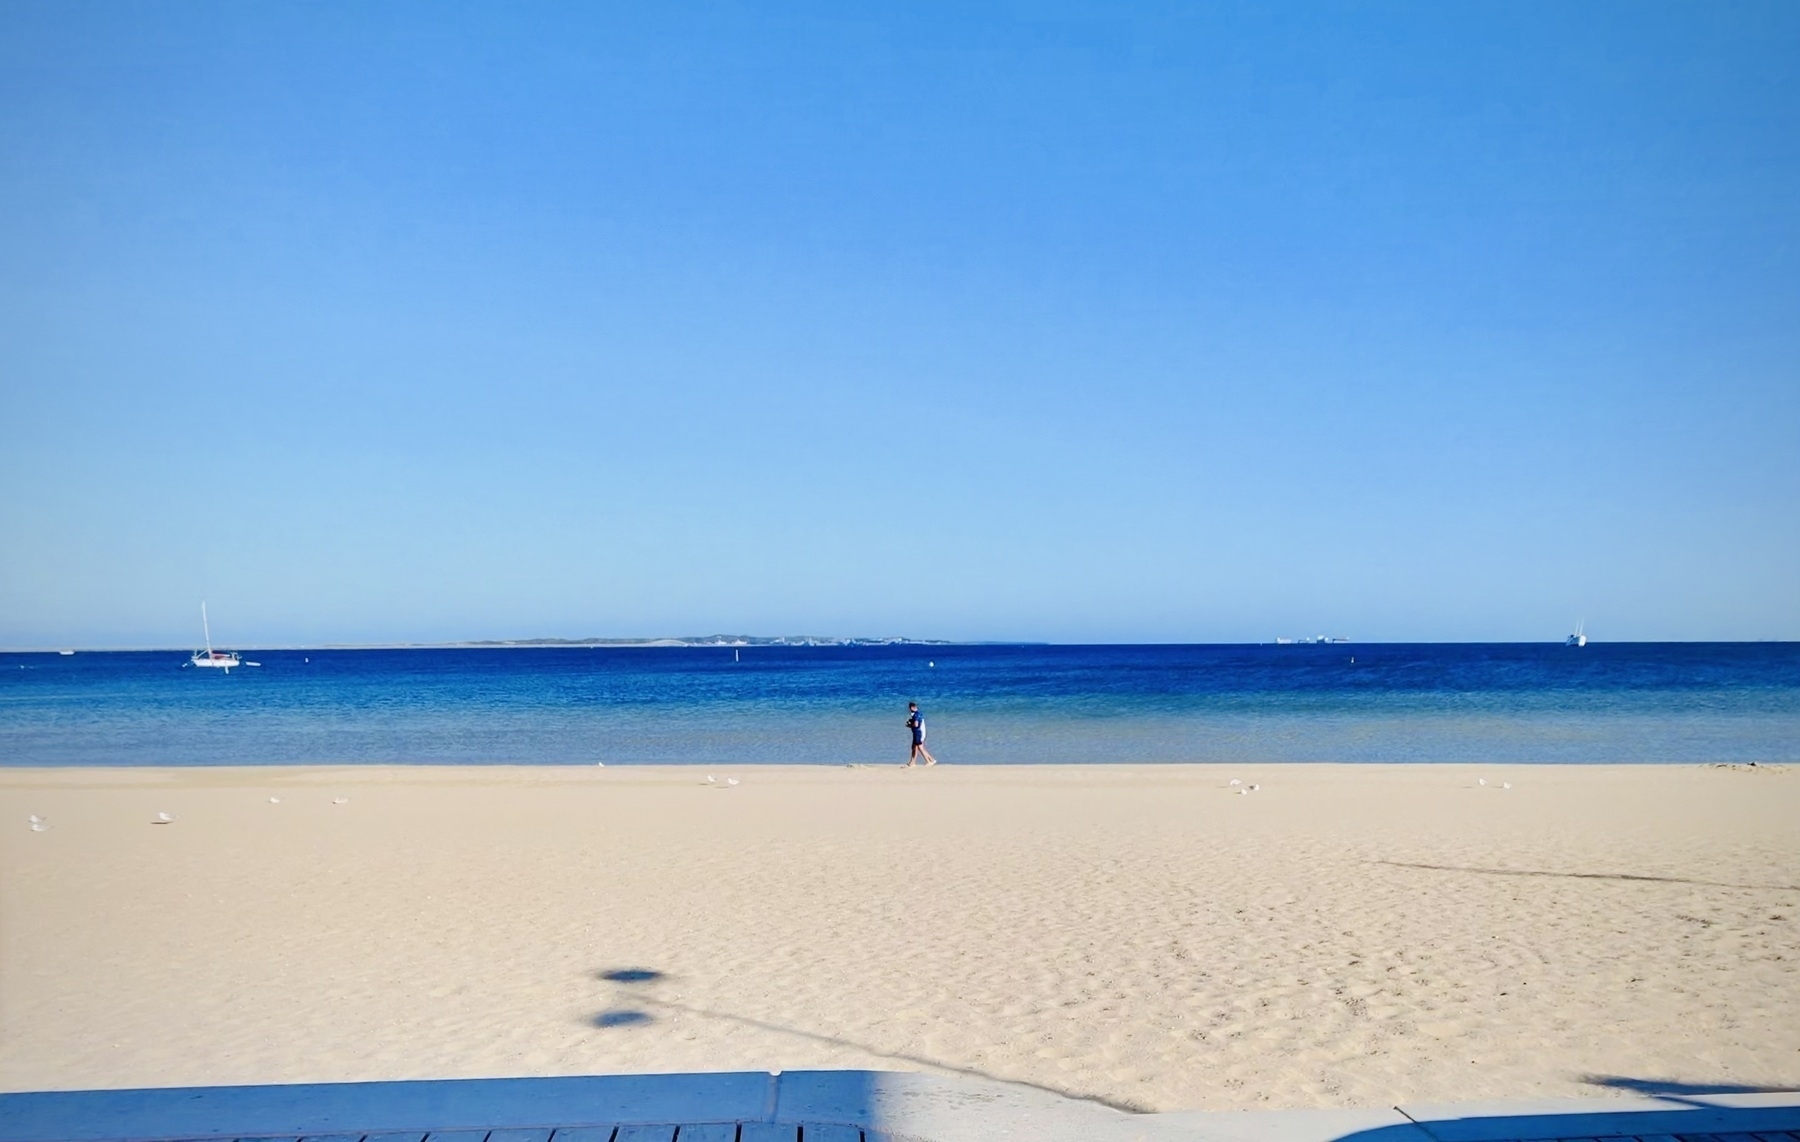 photo of someone walking along a beach with a clear blue sky - image by author